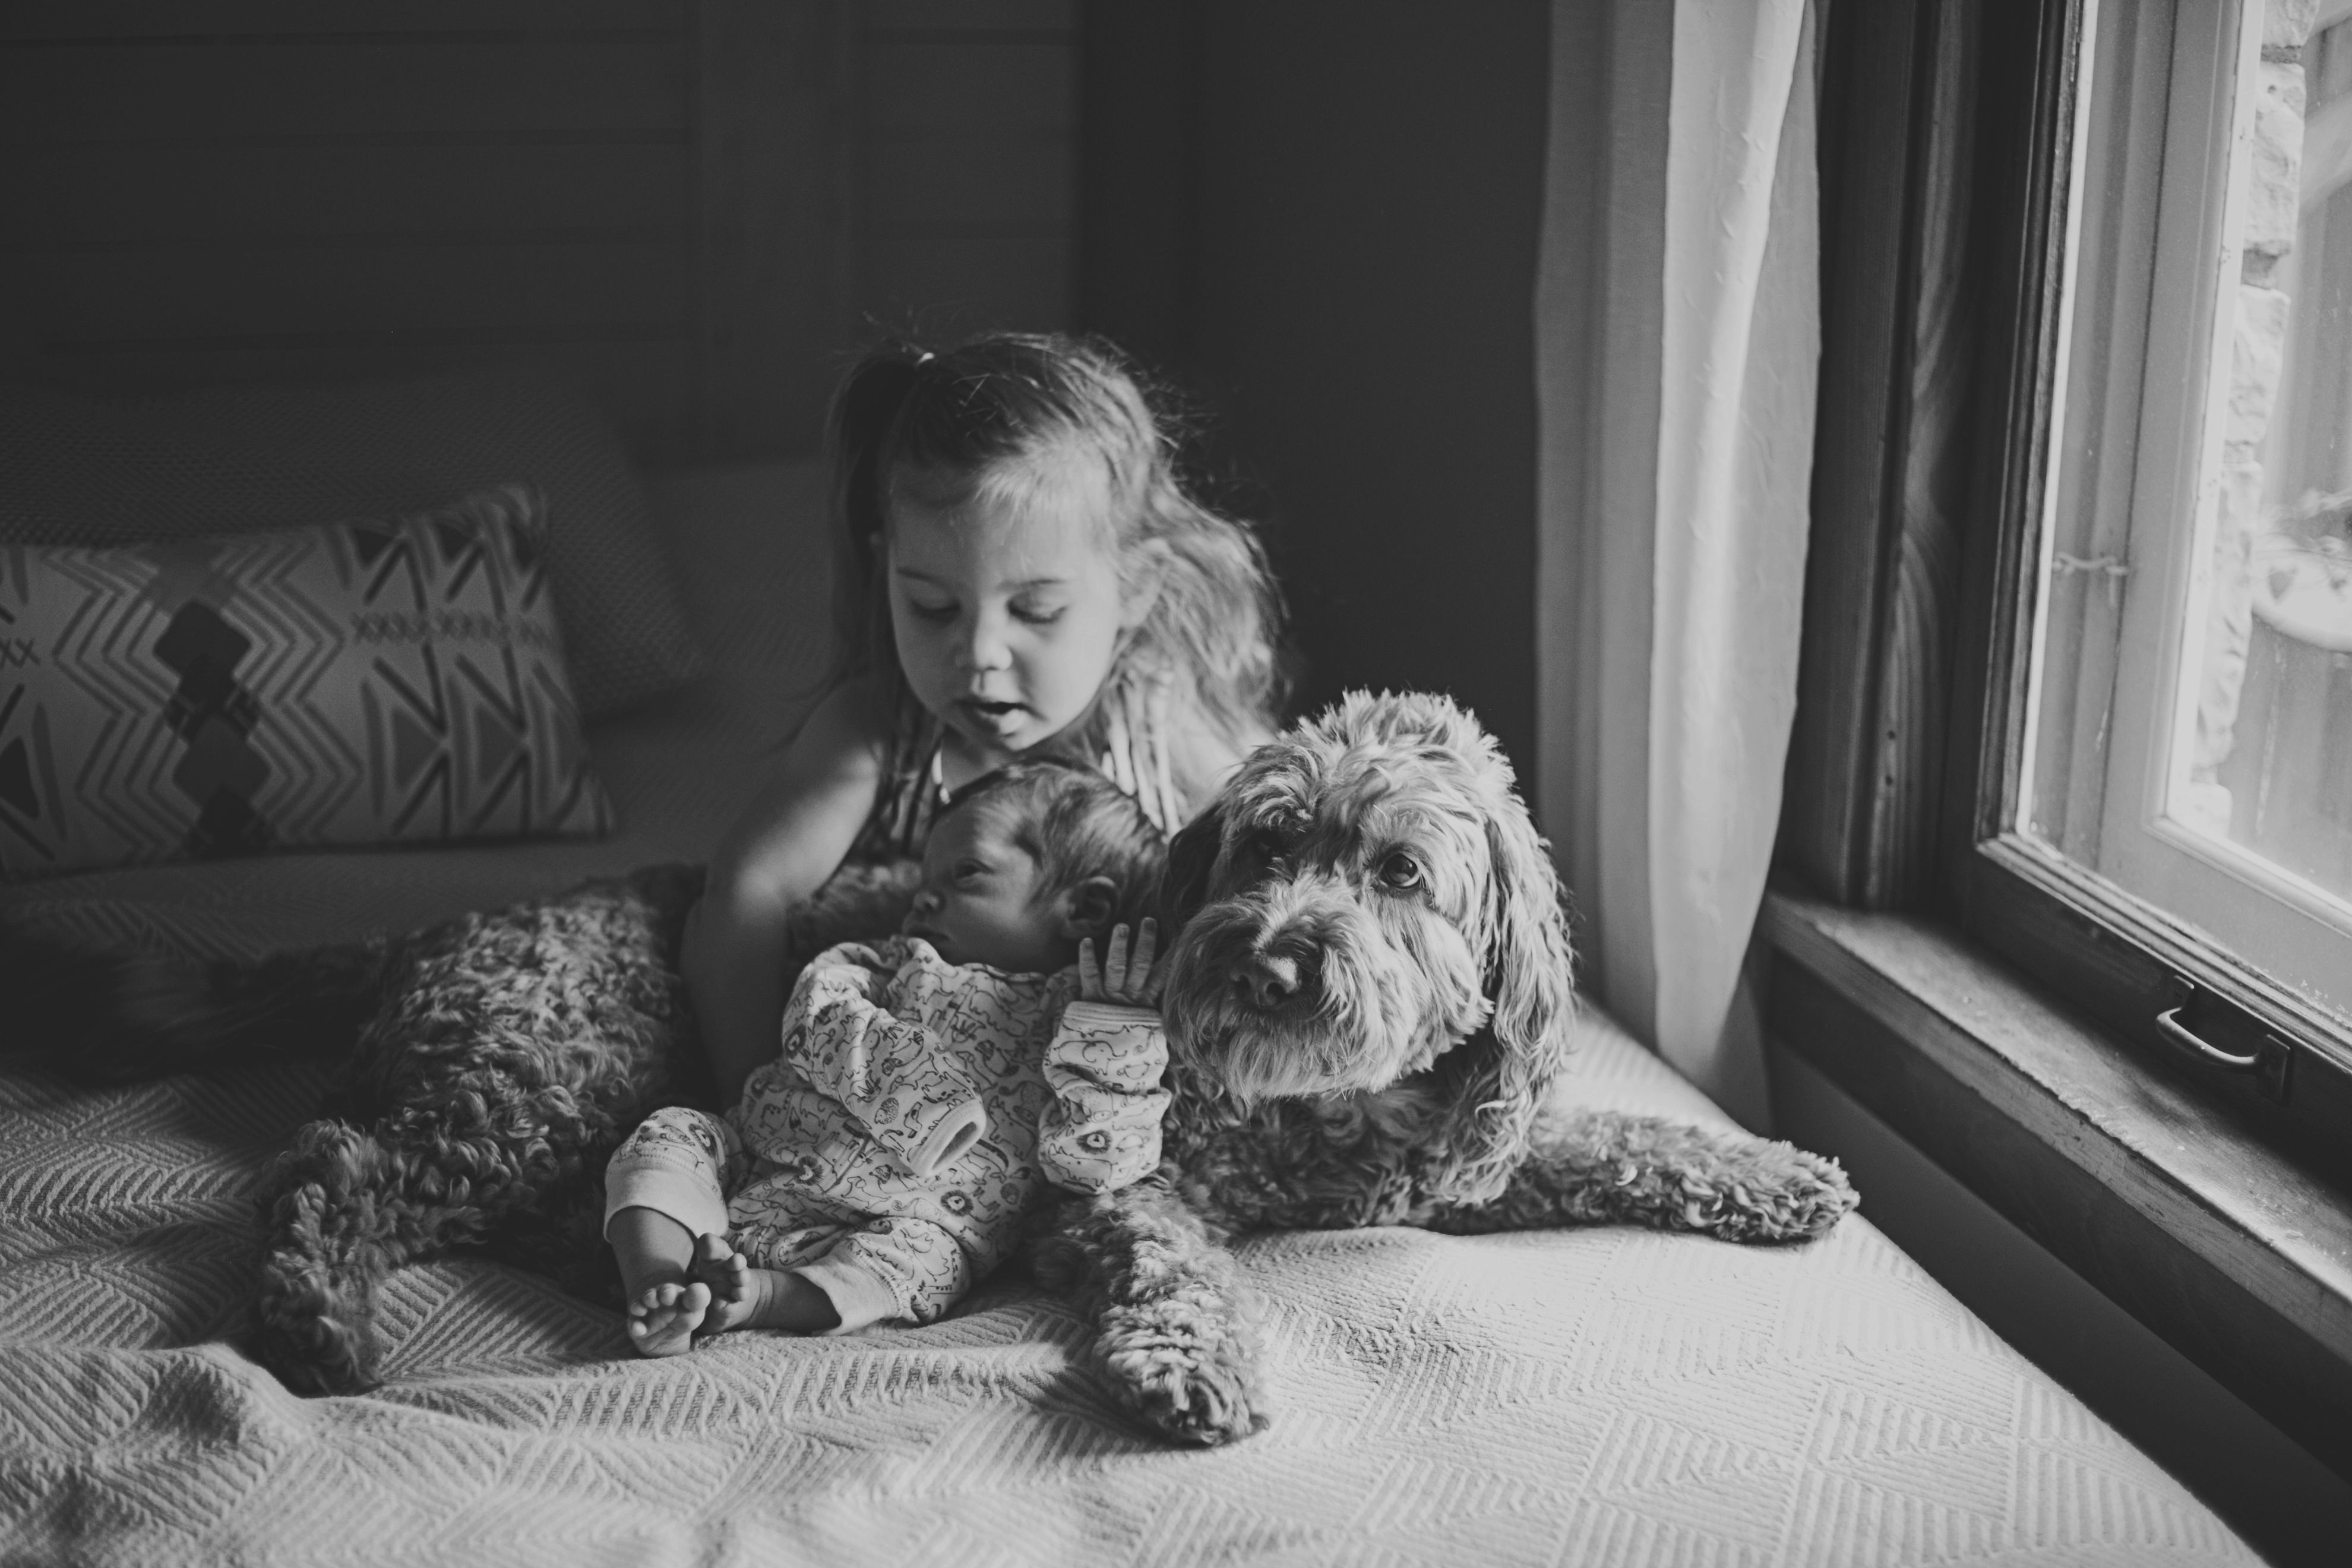 child with her dog